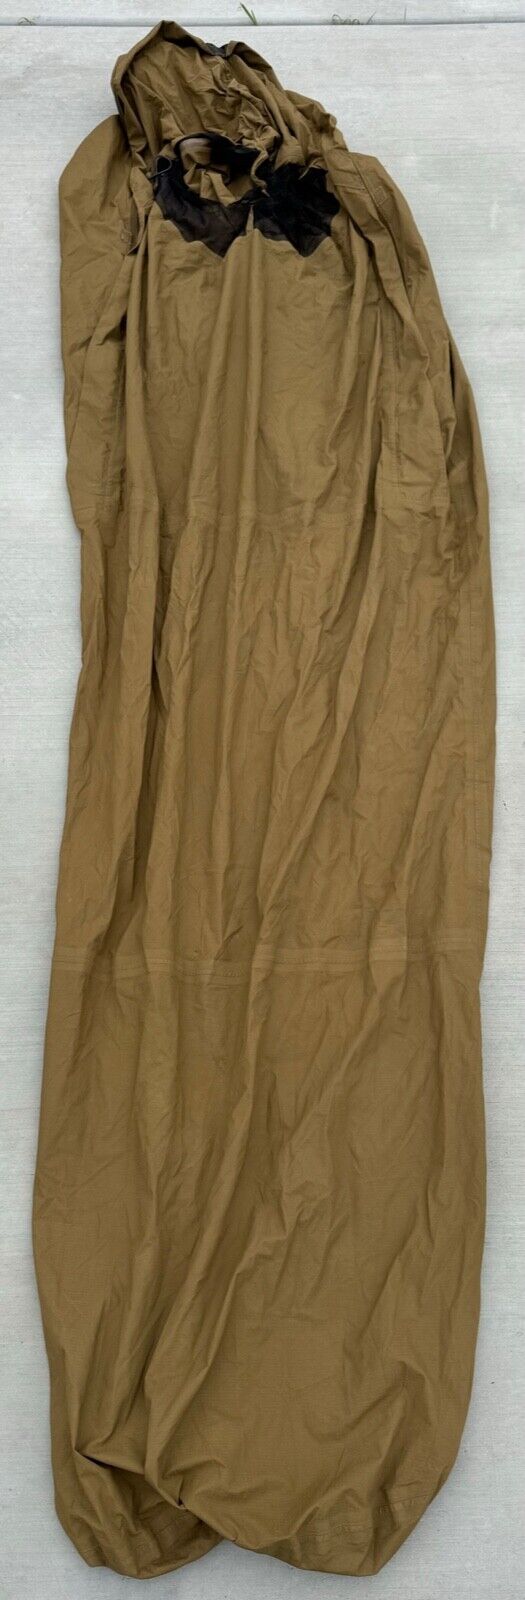 USMC Marine Corps Improved Bivy Cover Waterproof GoreTex Coyote Brown *DAMAGED*